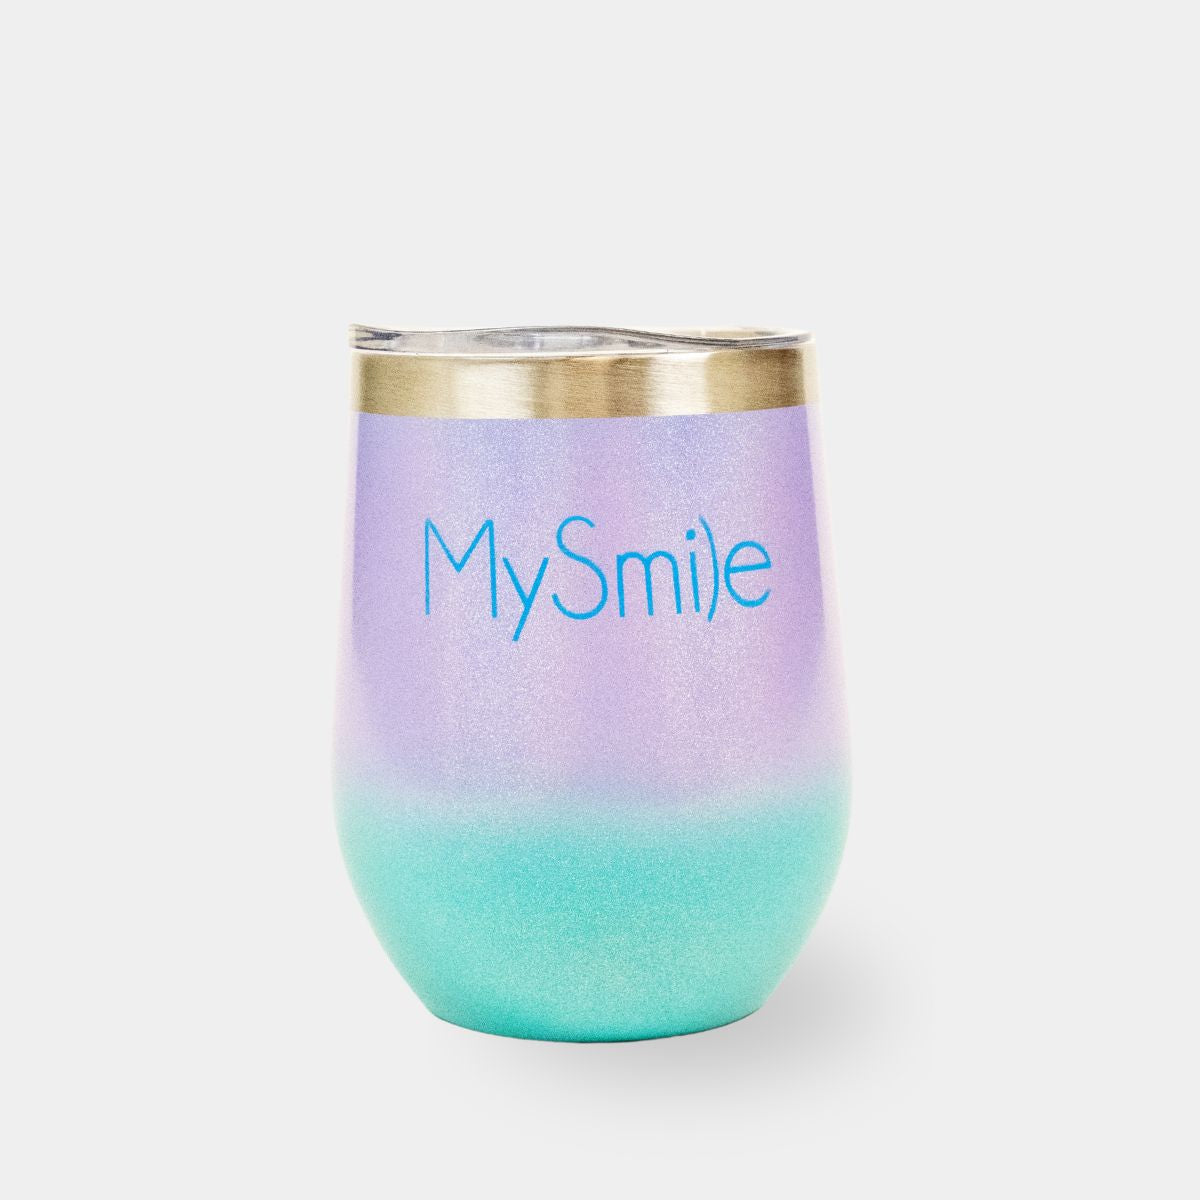 MySmile "Not a Day over Fabulous" Cup